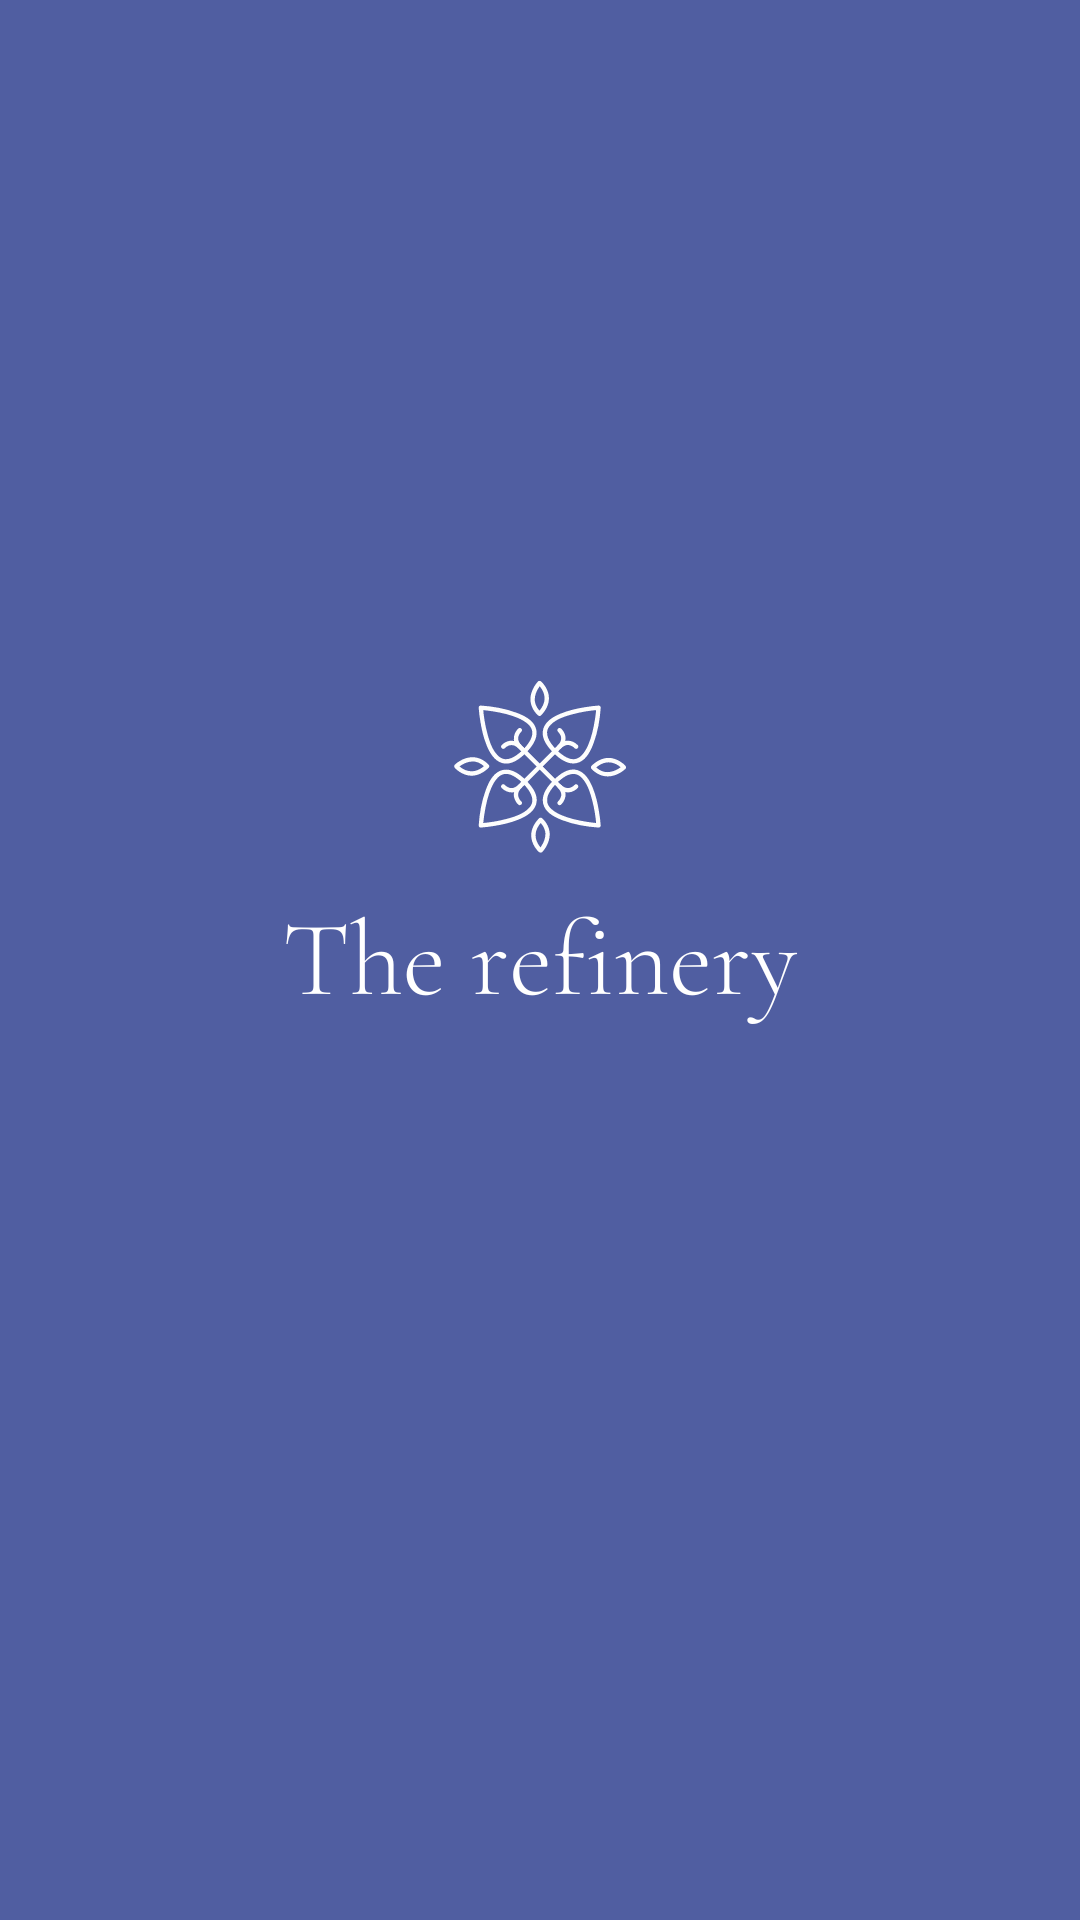 The refinery